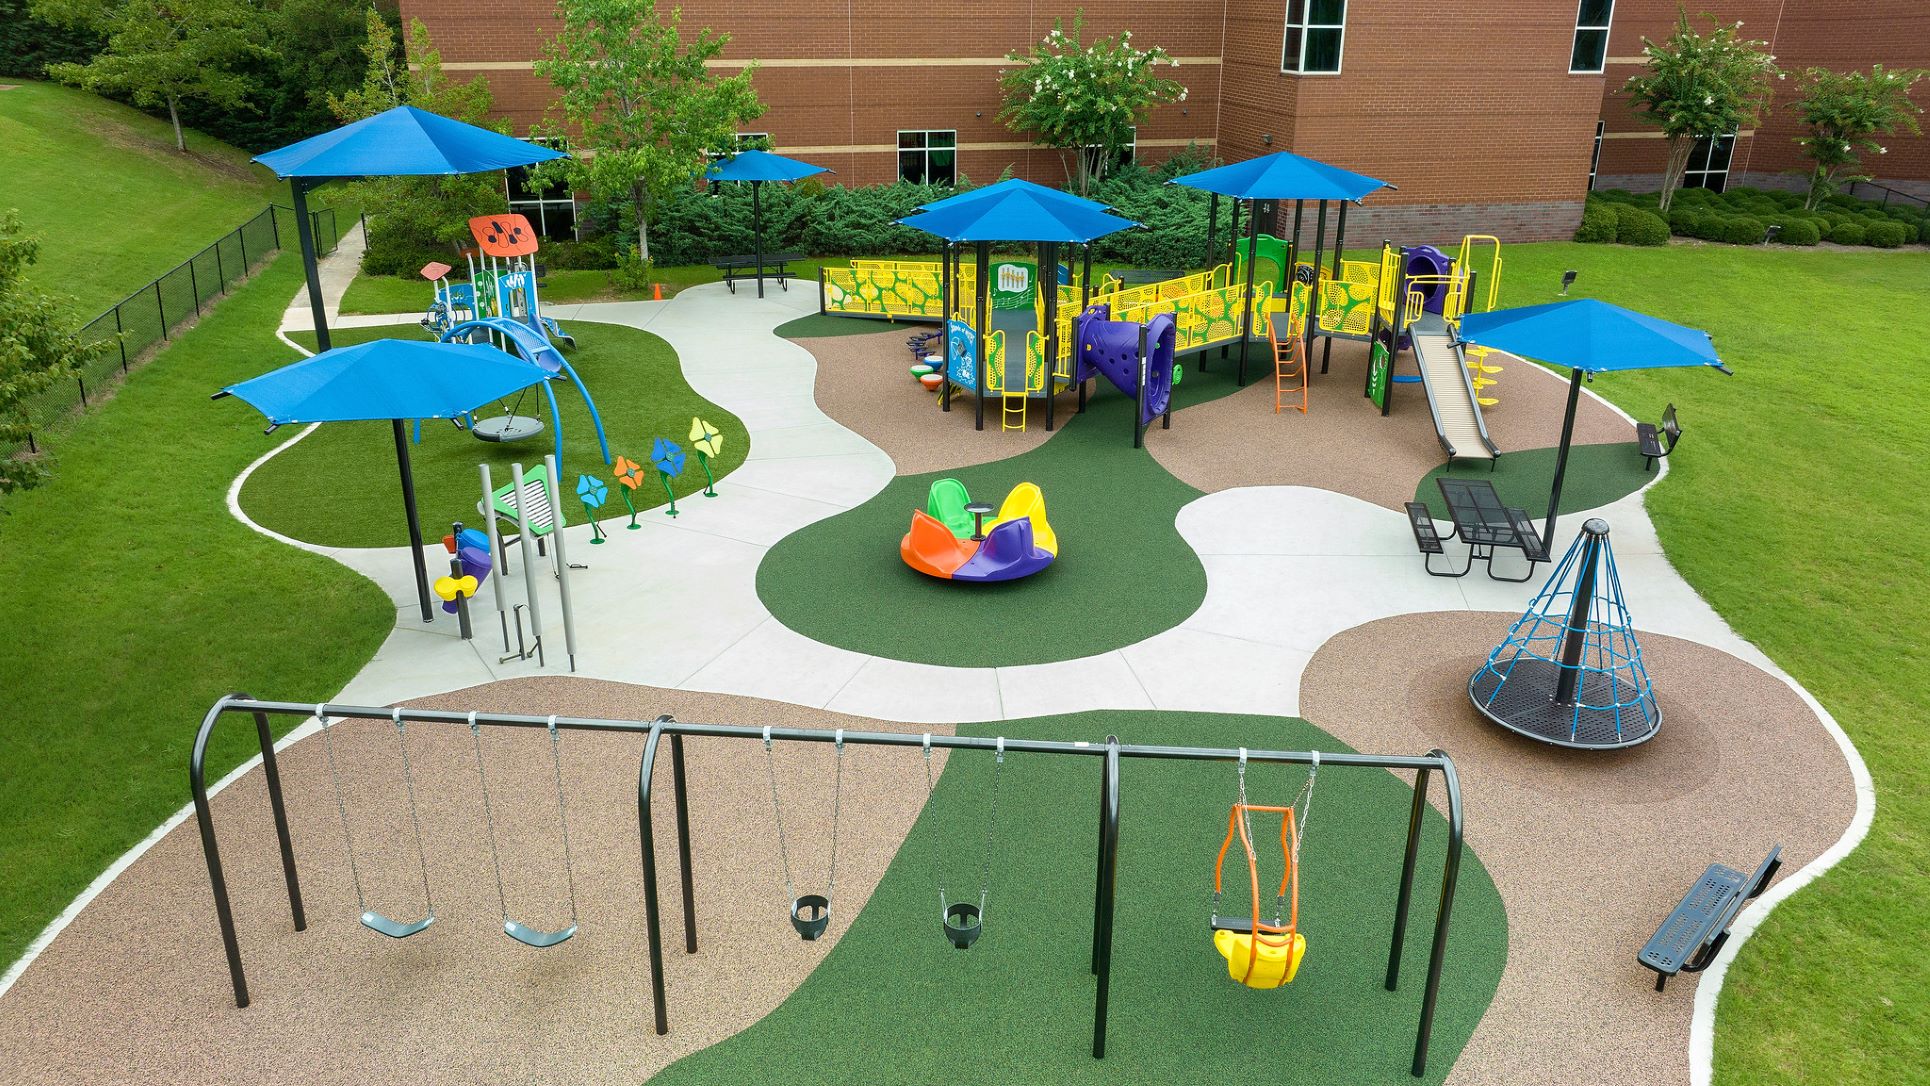 5 Safety Tips For A Safe Playground